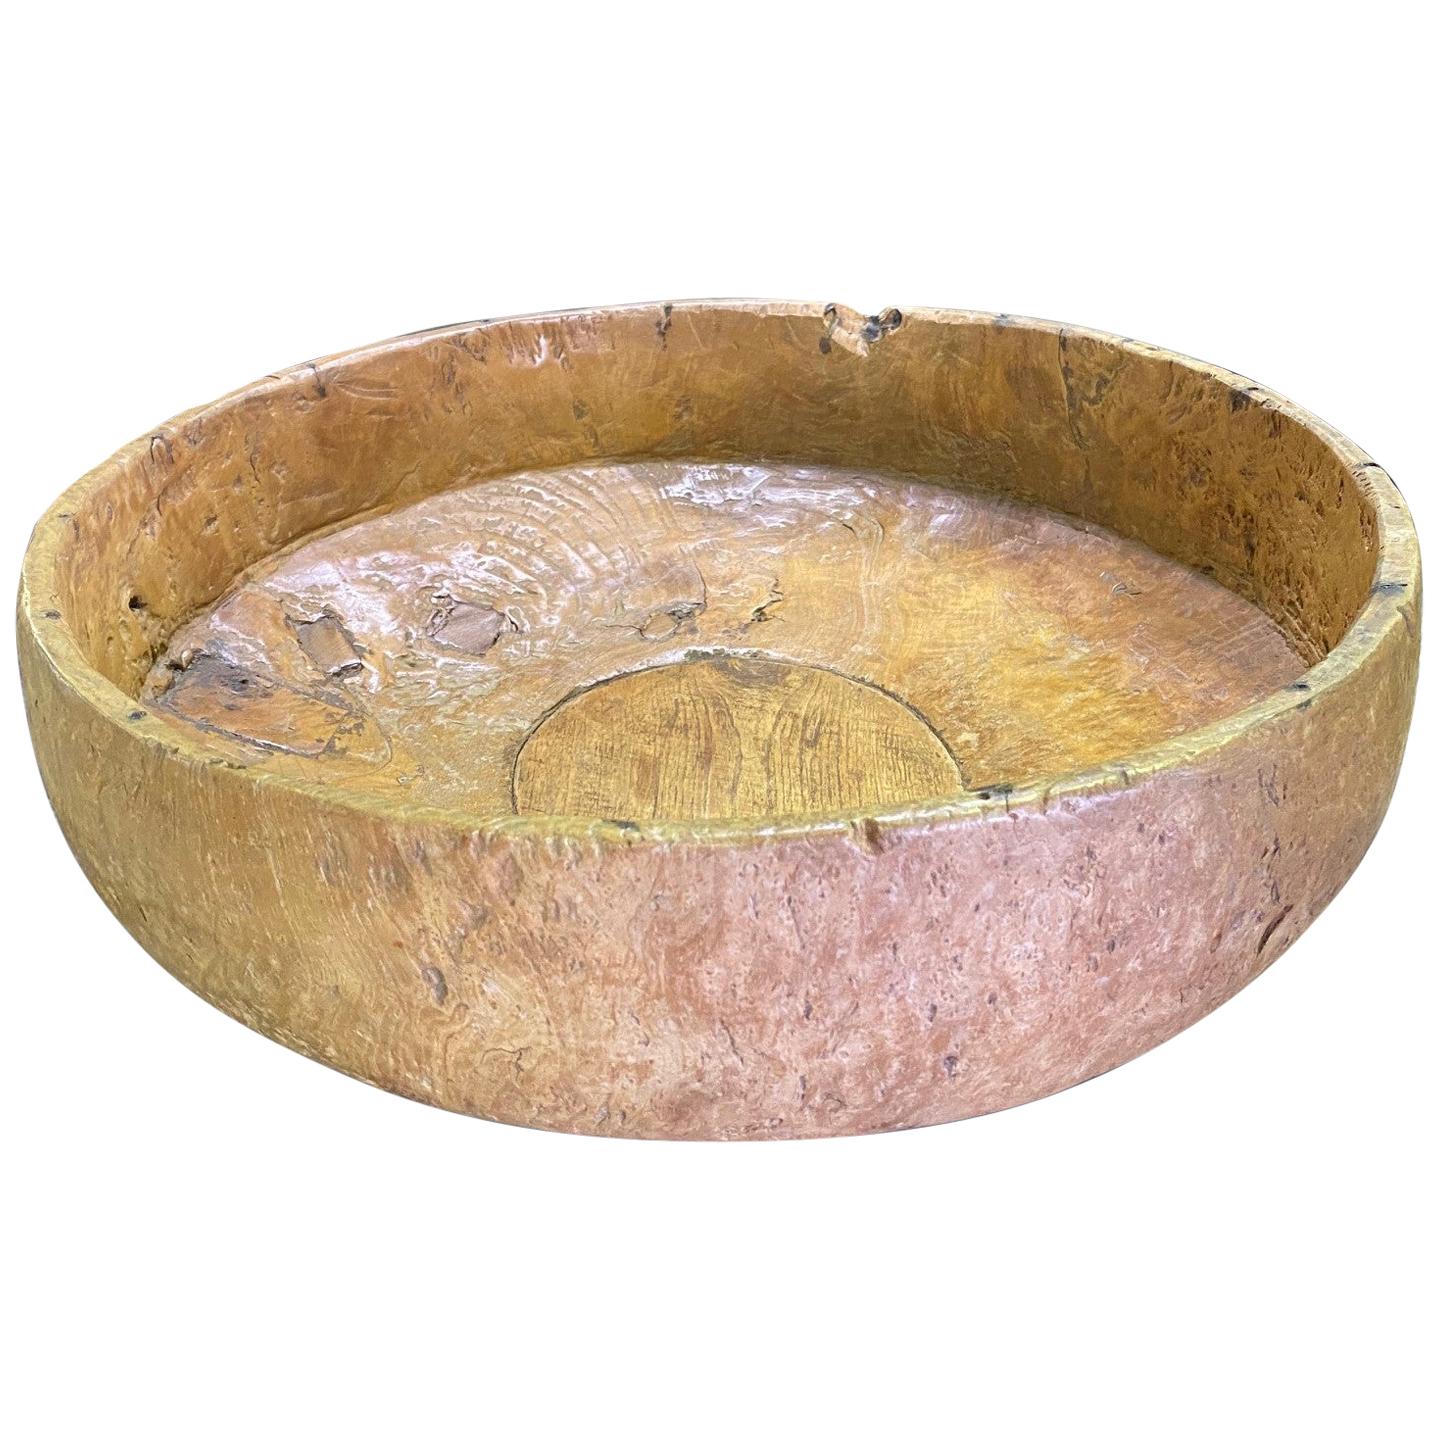 Large Heavy Monumental Massive Rustic Wood Carved Centerpiece Bowl